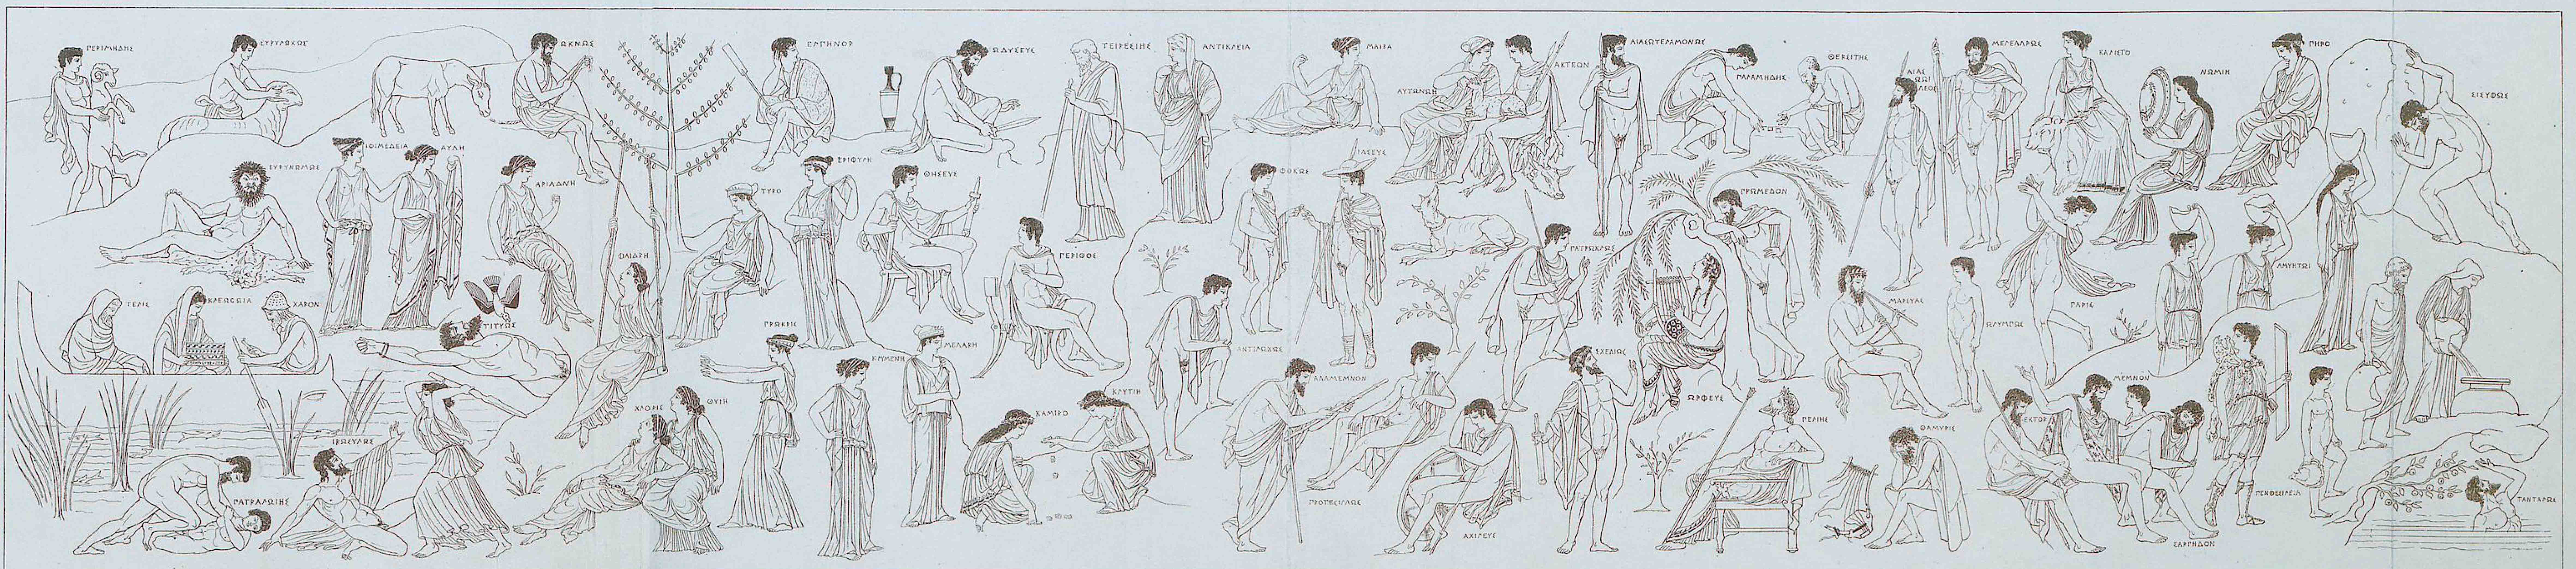 An 1892 reconstruction of the Polygnotus's Nekyia at Delphi reported by Pausanias, in Roert Carl, Hallisches Winckelmannsprogramm (Band 16): Die Nekyia des Polygnot (Halle a. S., 1892)